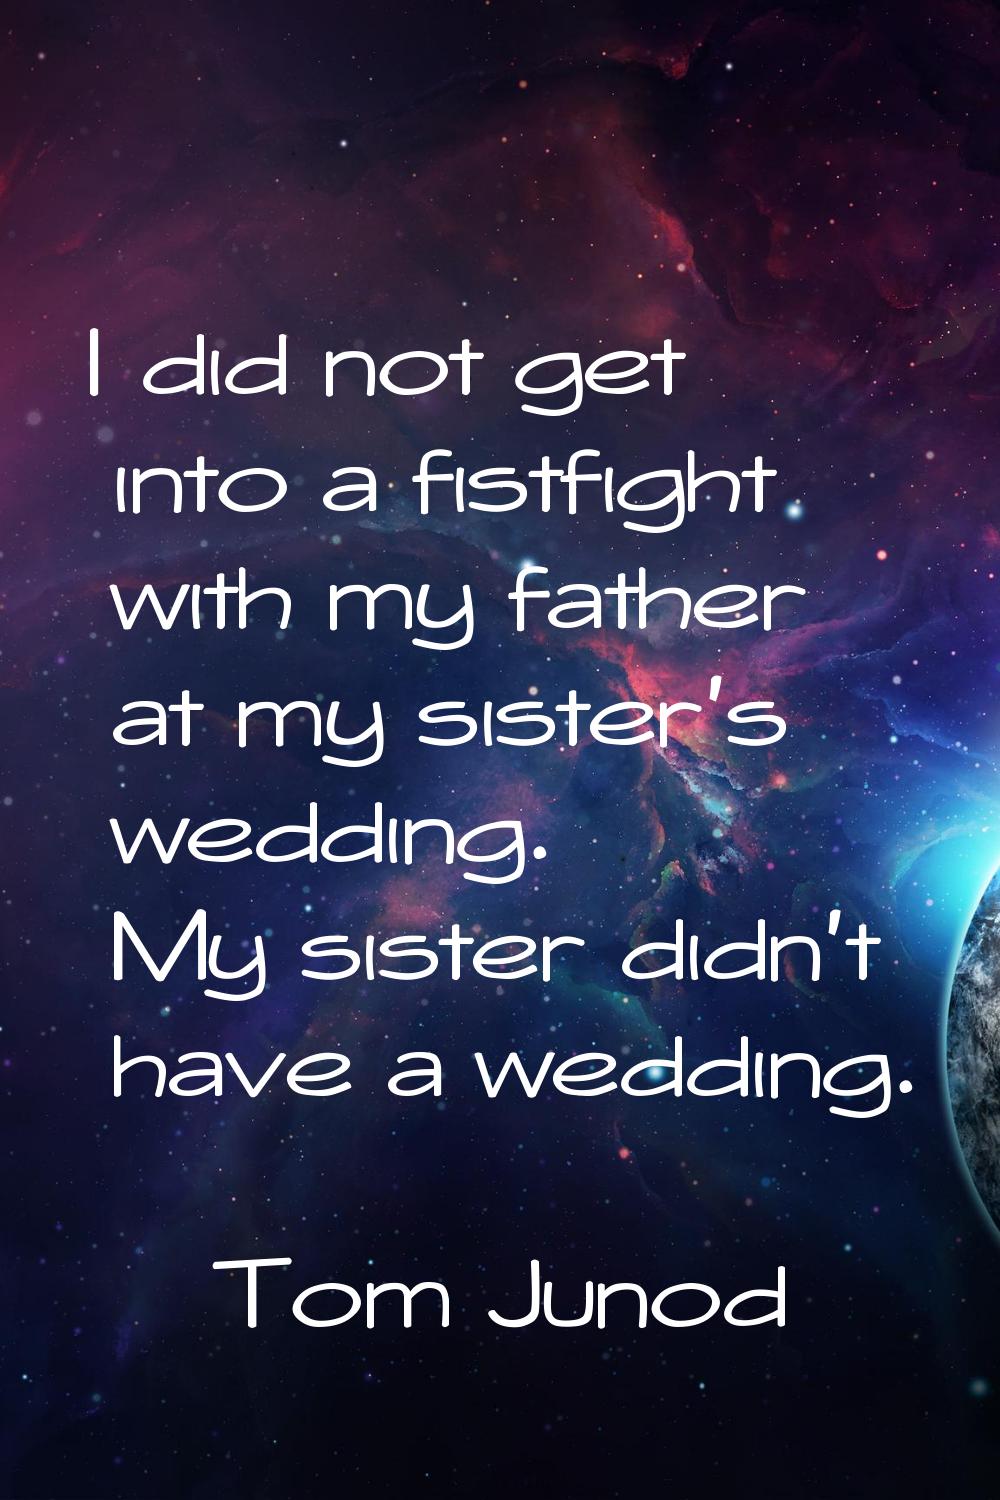 I did not get into a fistfight with my father at my sister's wedding. My sister didn't have a weddi